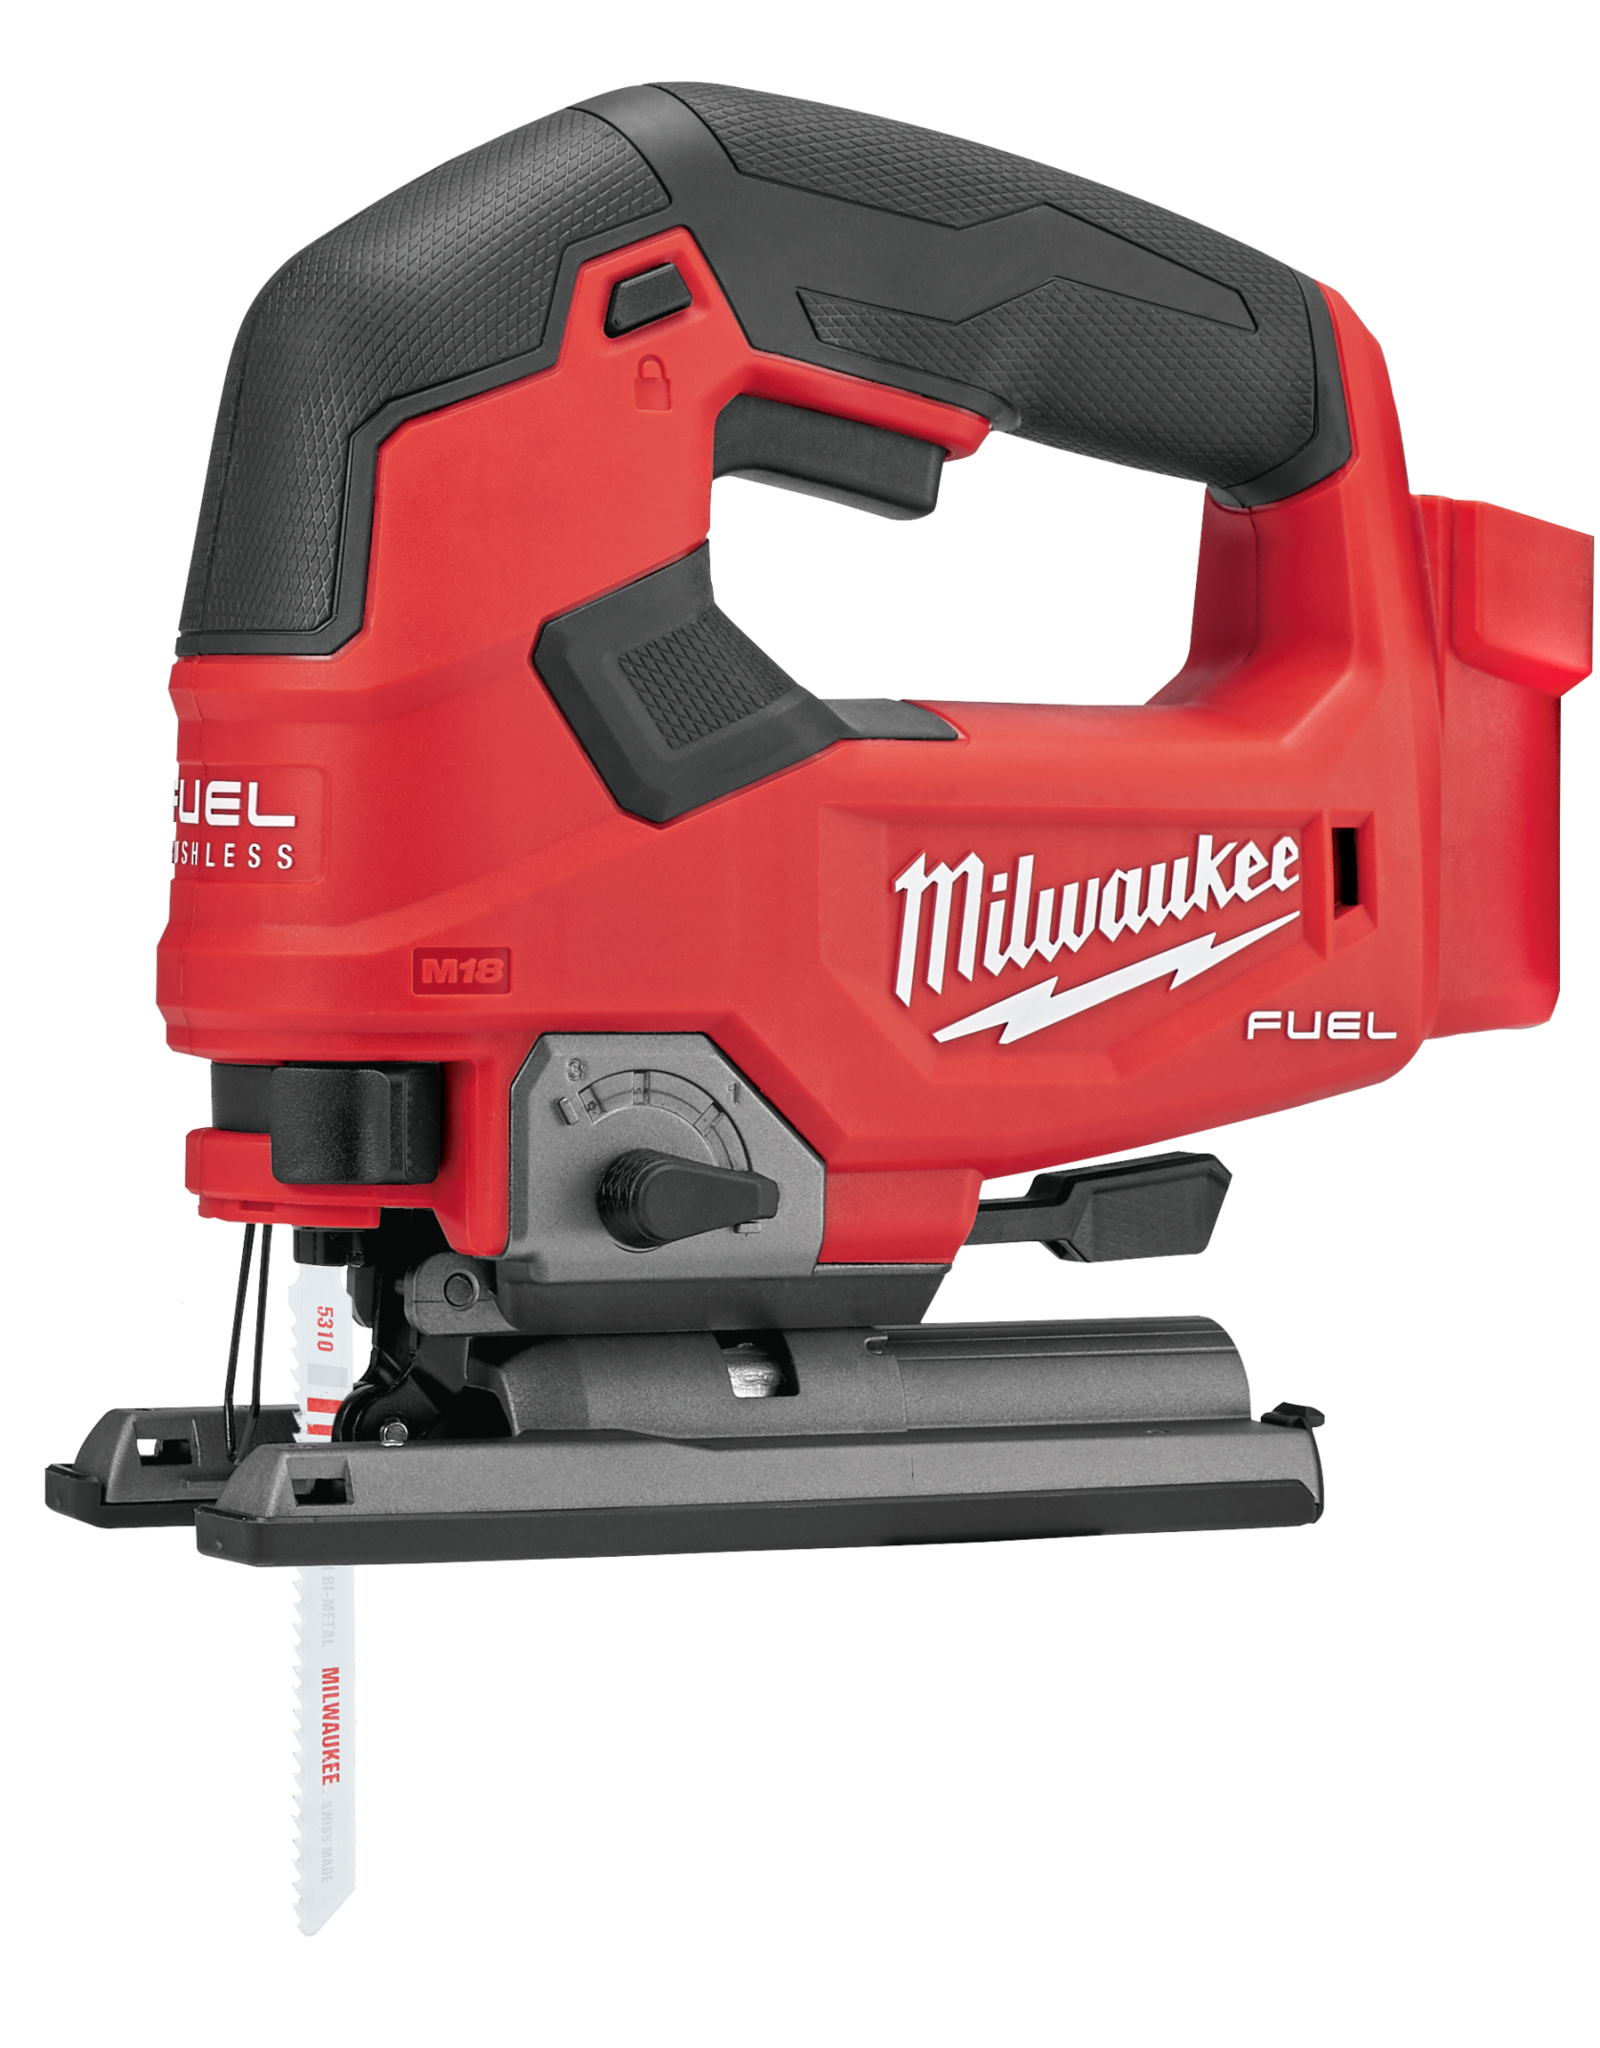 Milwaukee Milwaukee M18 FUEL 2737-20 Jig Saw, Bare Tool, 18 V Battery, Lithium-Ion Battery, 1 in L Stroke, Black/Red